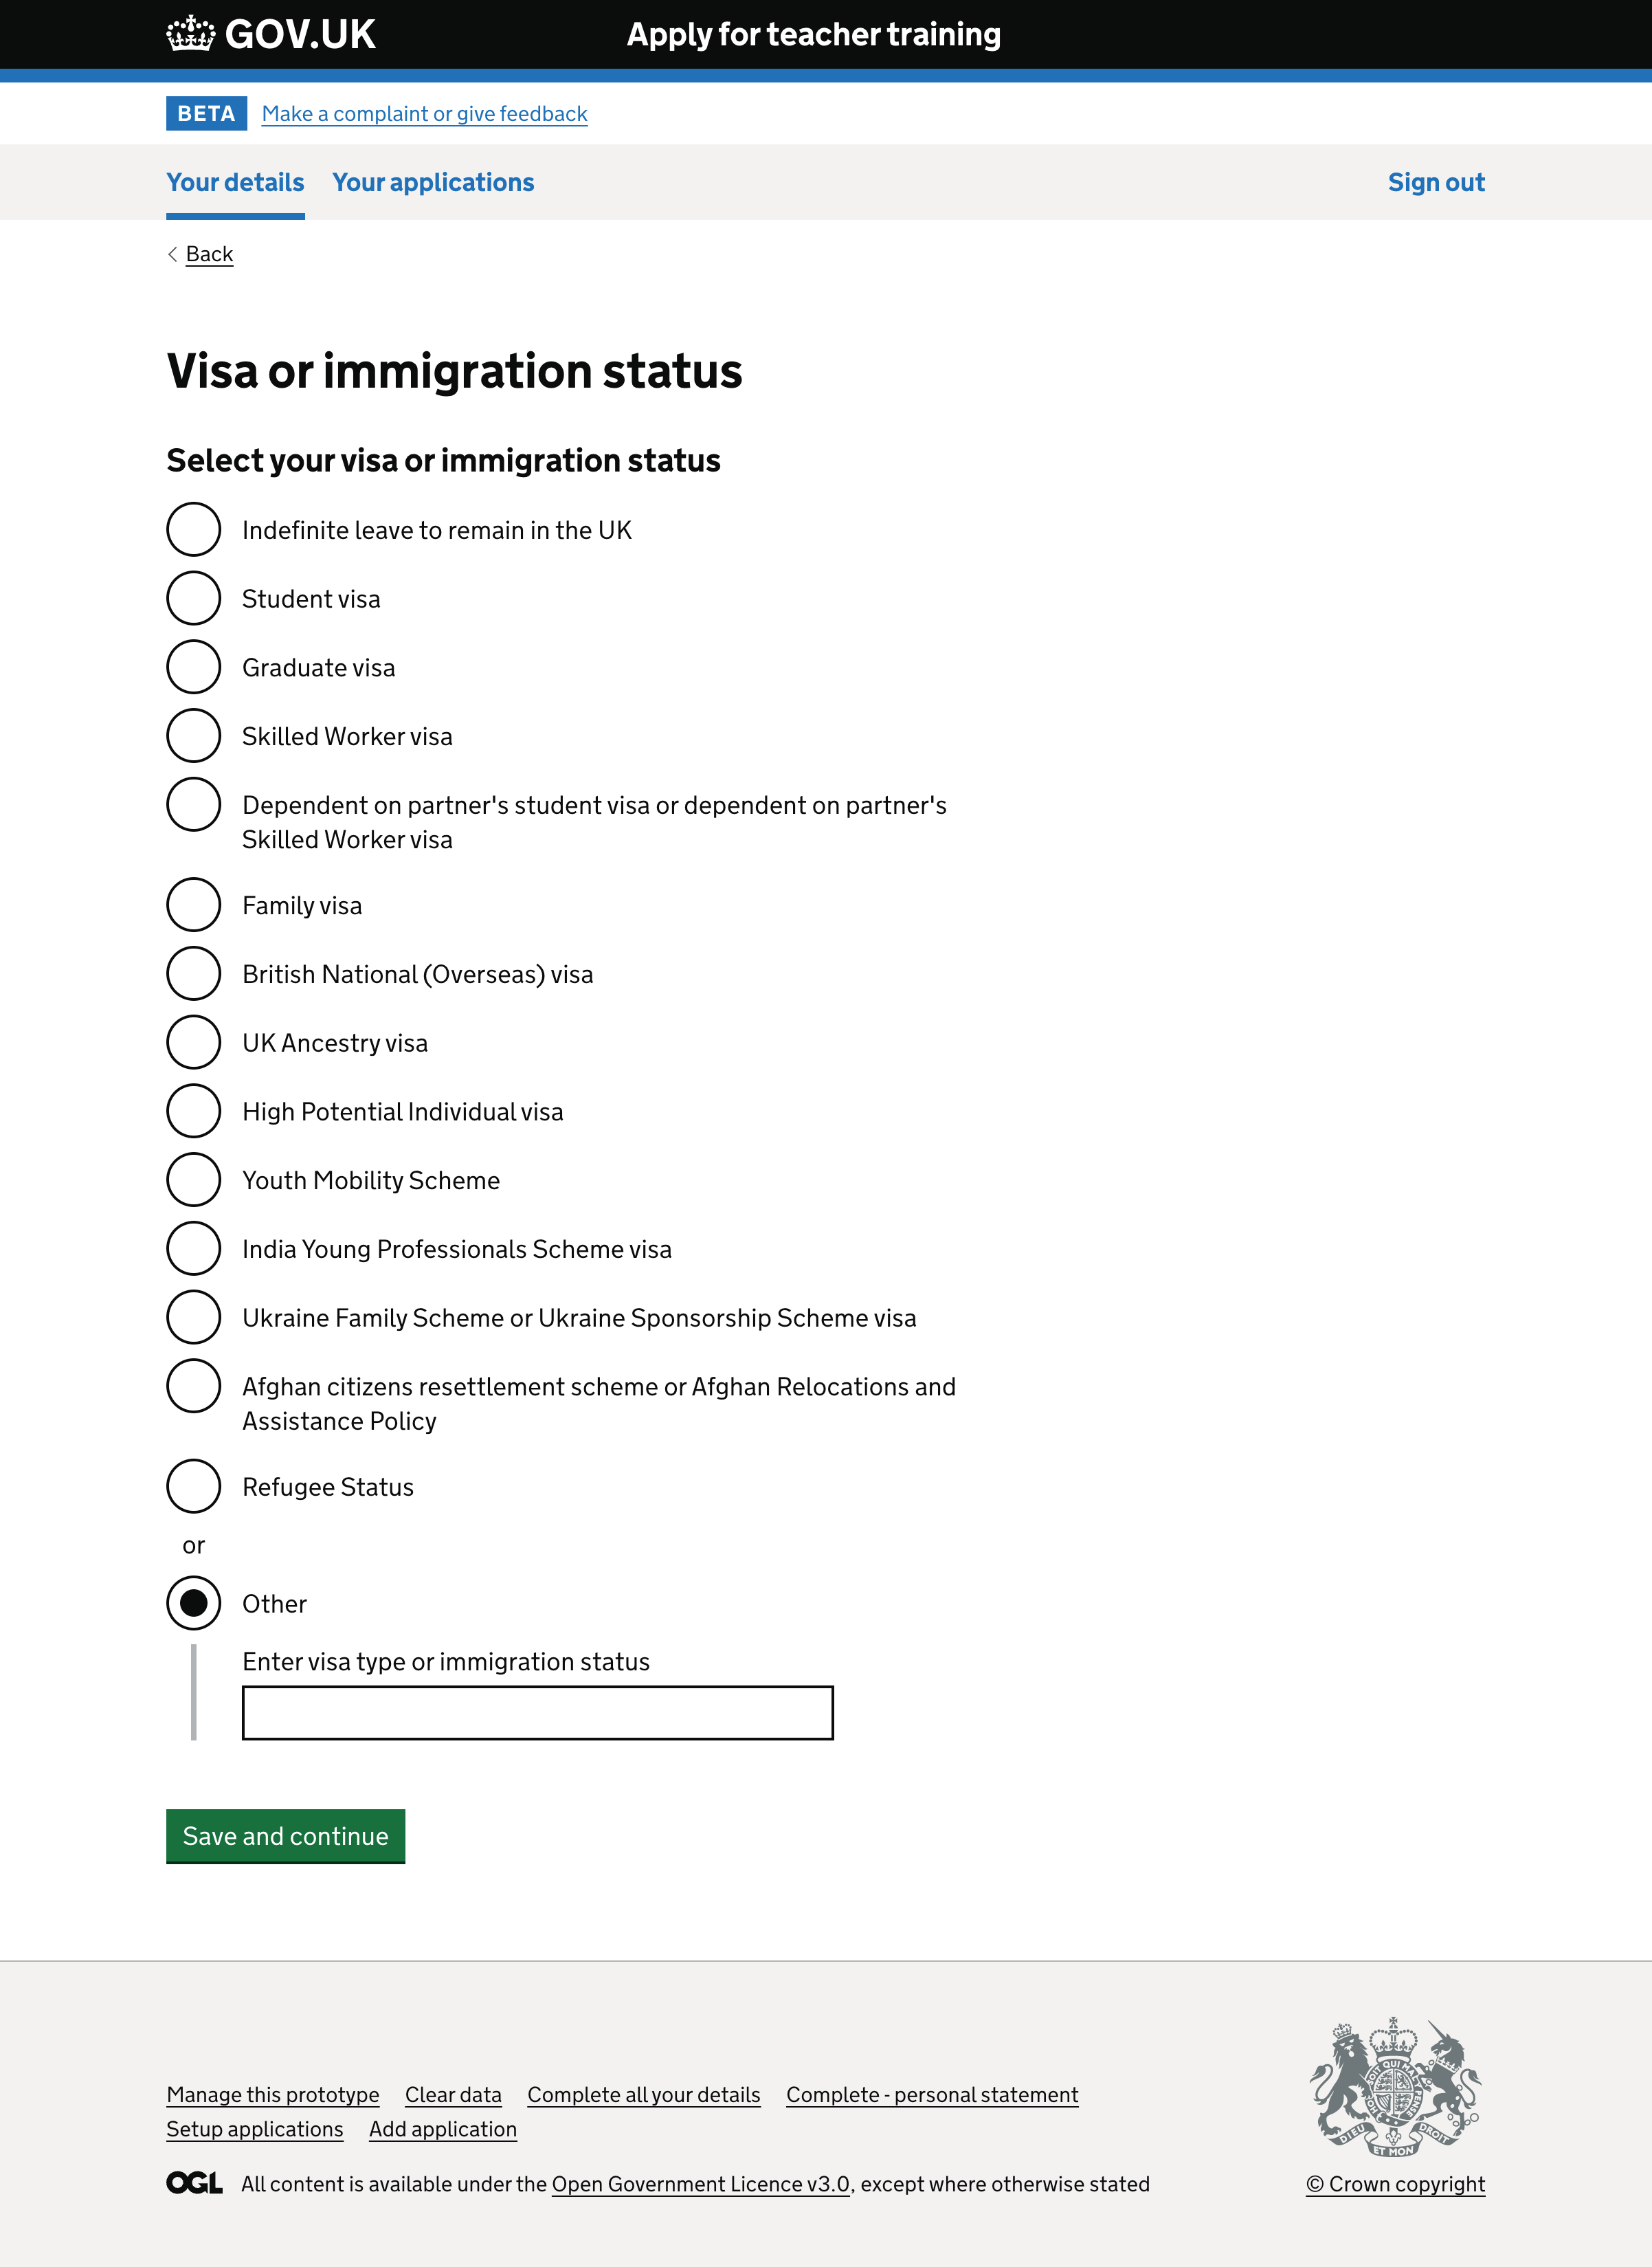 Screenshot of visa or immigration status page showing multiple radio button options for non- European economic area users